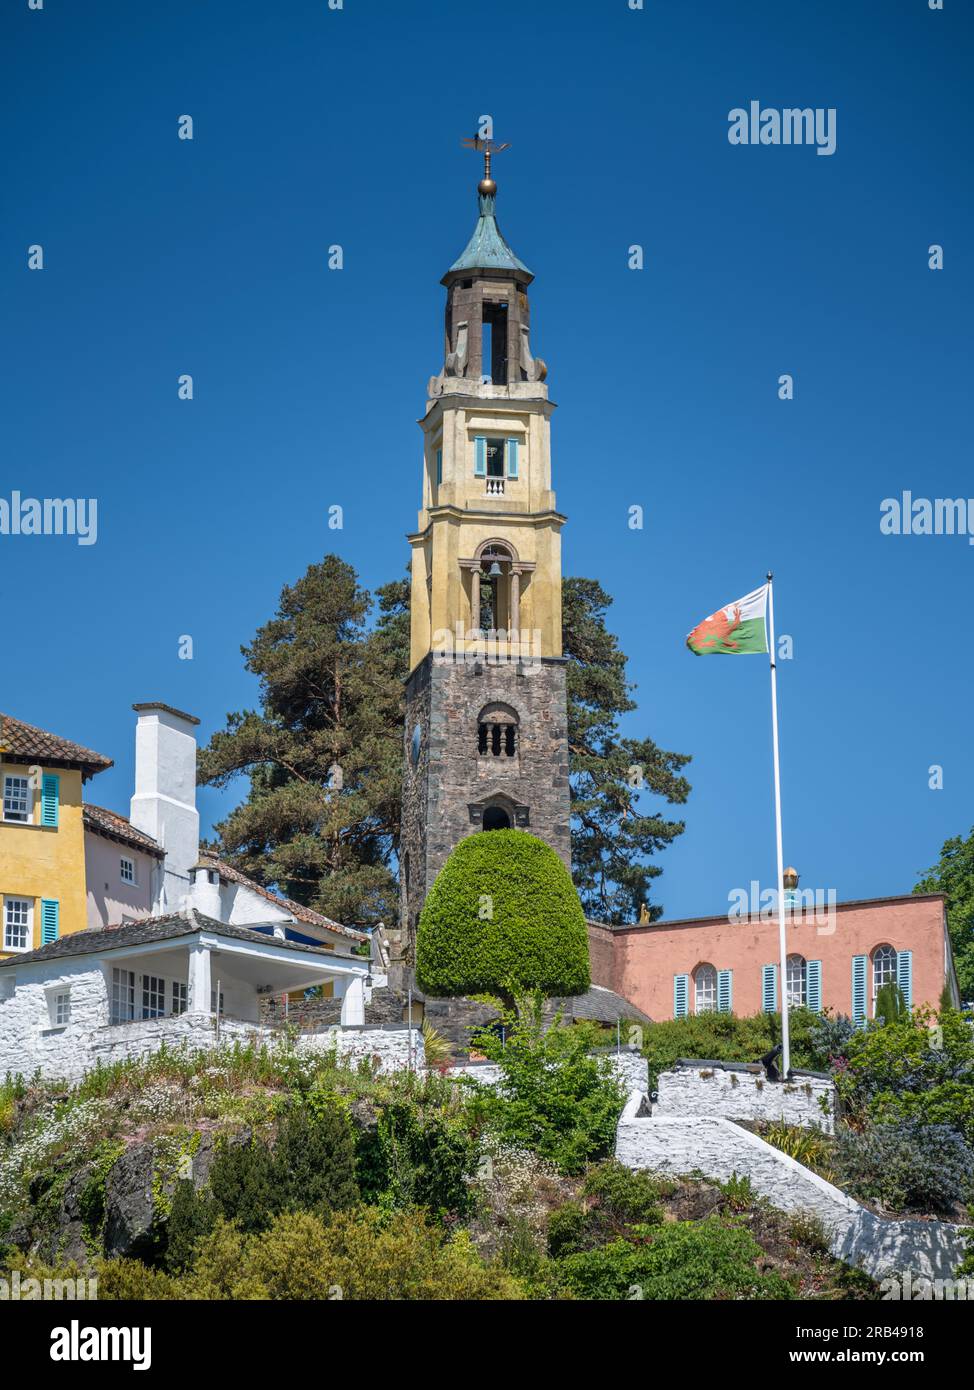 The Bell Tower, Portmeirion, North Wales, Großbritannien Stockfoto